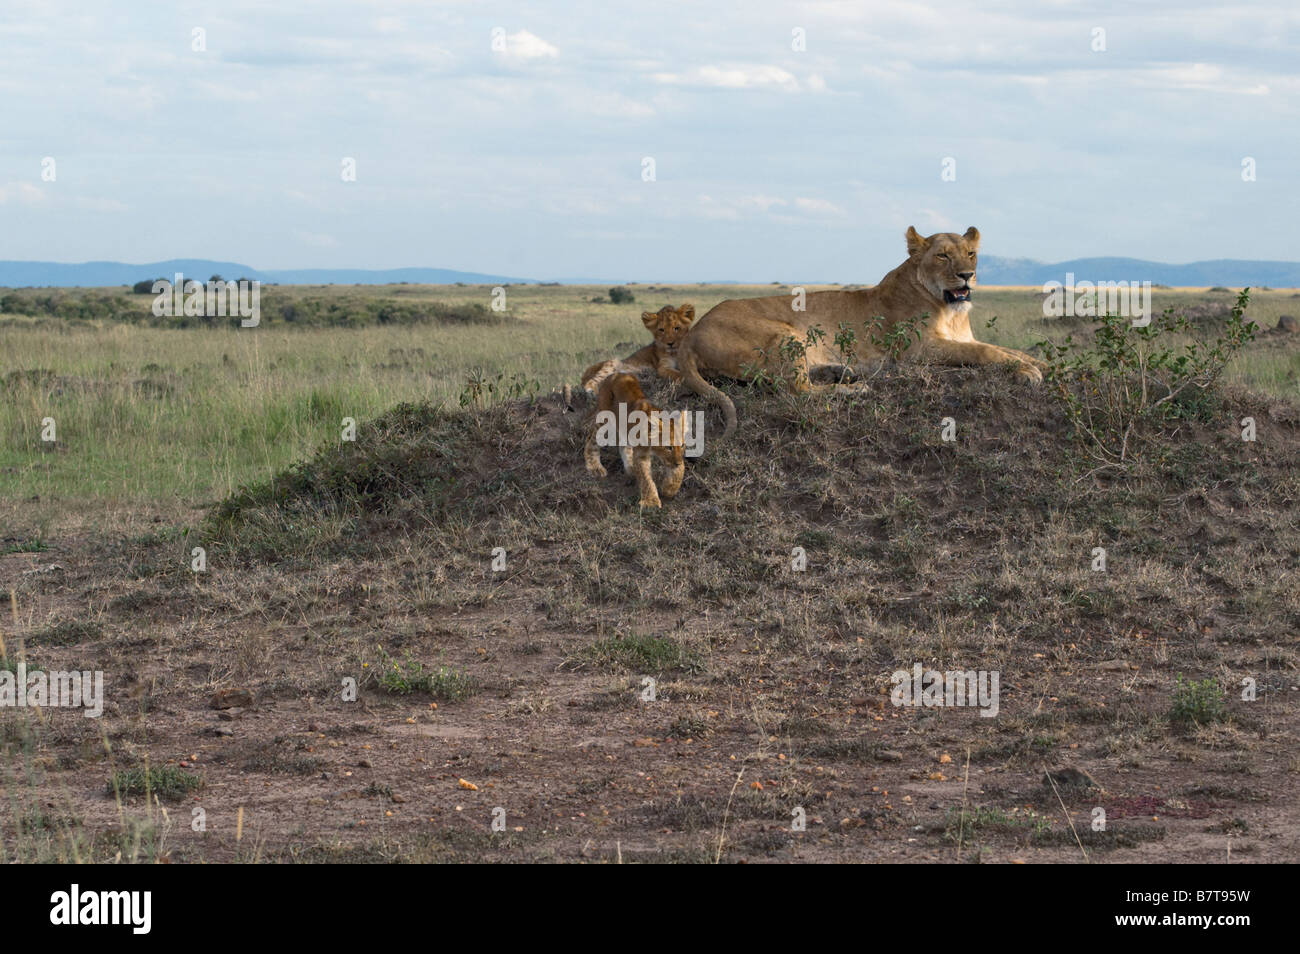 African lioness with two young cubs Stock Photo